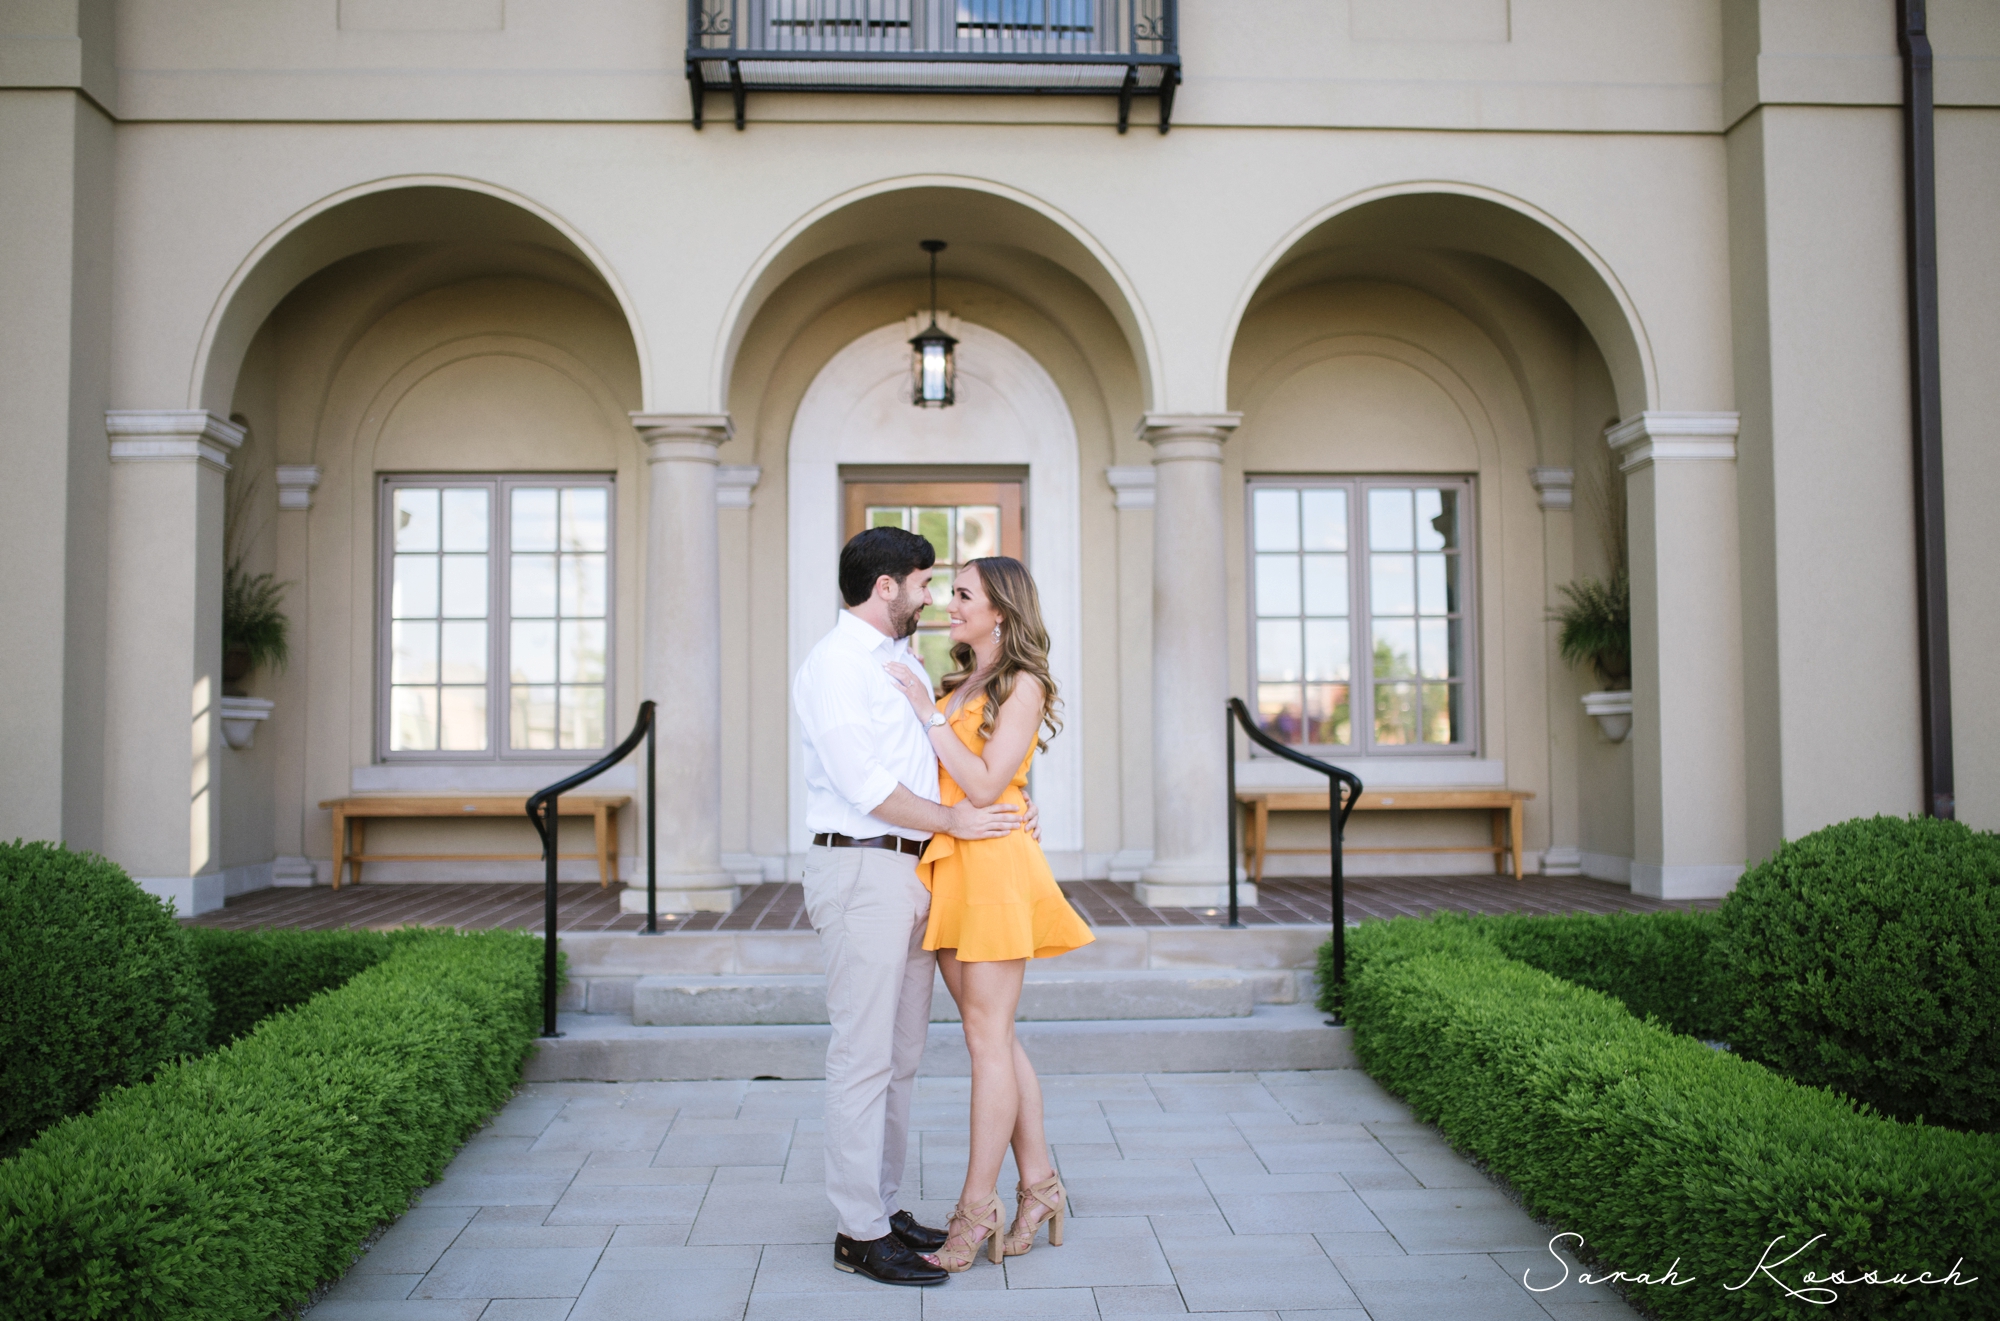 Rochester Engagement Photography, Yellow Sundress, Couple Embraces, Downtown Rochester, Michigan Engagement, Documentary Photography, Fine Art Edits, The Knot Top Pick, Sarah Kossuch Photography